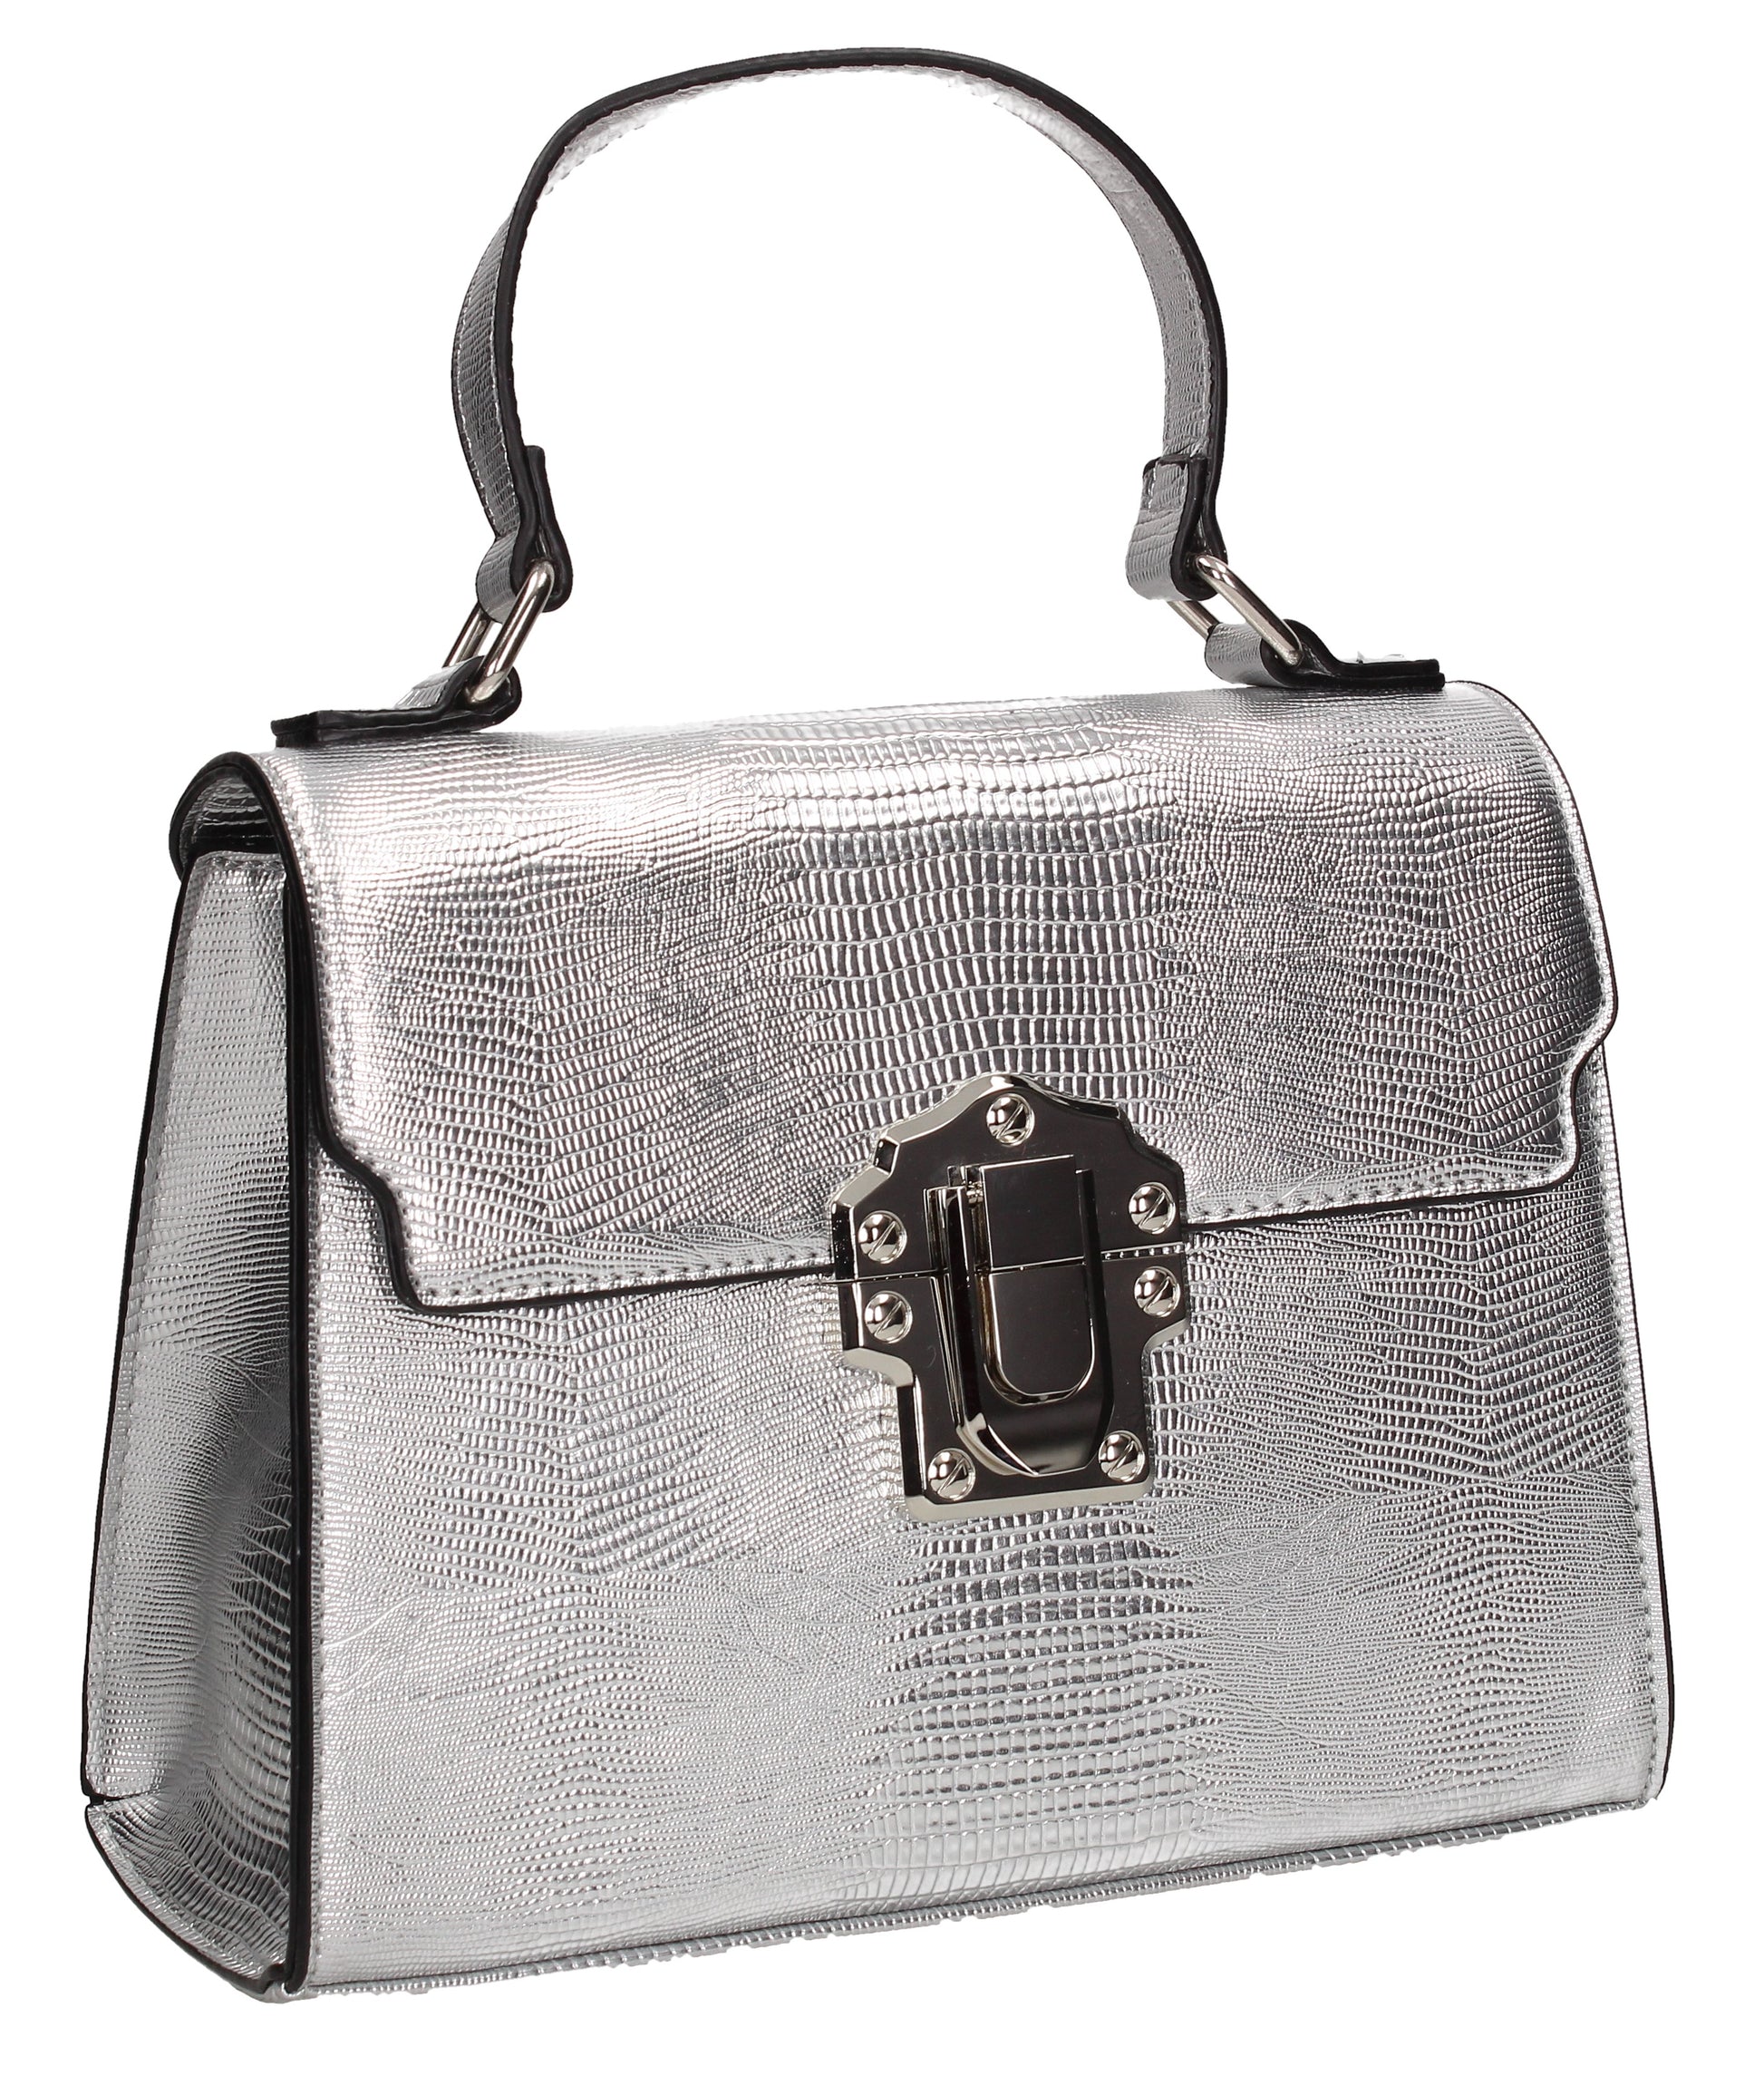 Swanky Swans Charlotte Handbag SilverPerfect for School, Weddings, Day out!